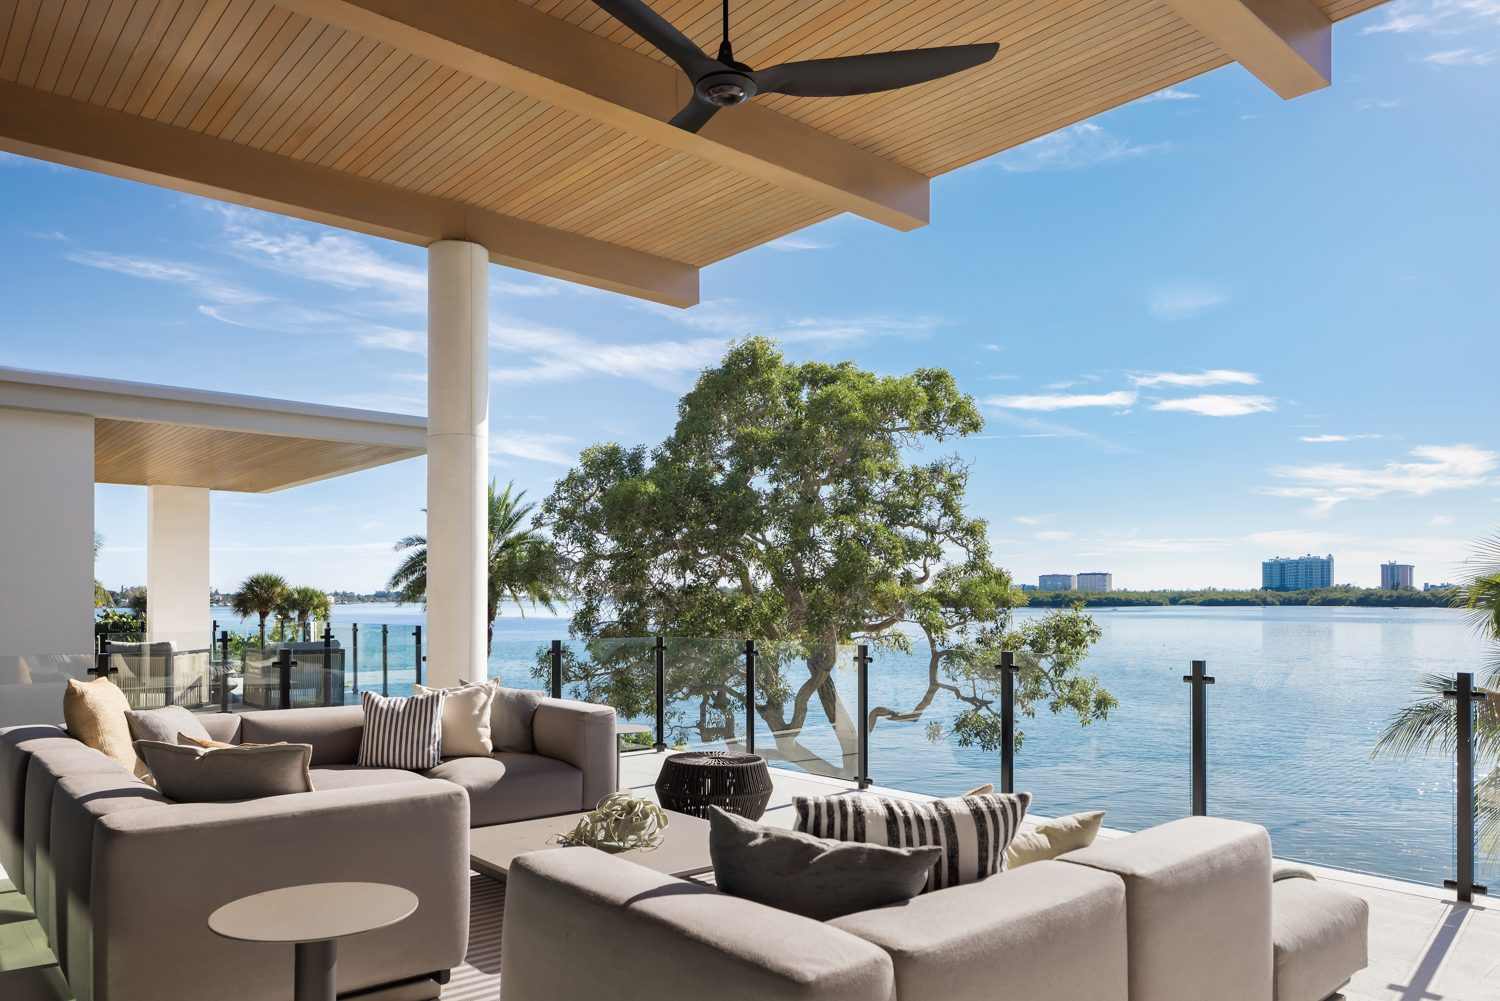 outdoor living area terrace with gray sectionals, coffee table and side tables overlooking waterway